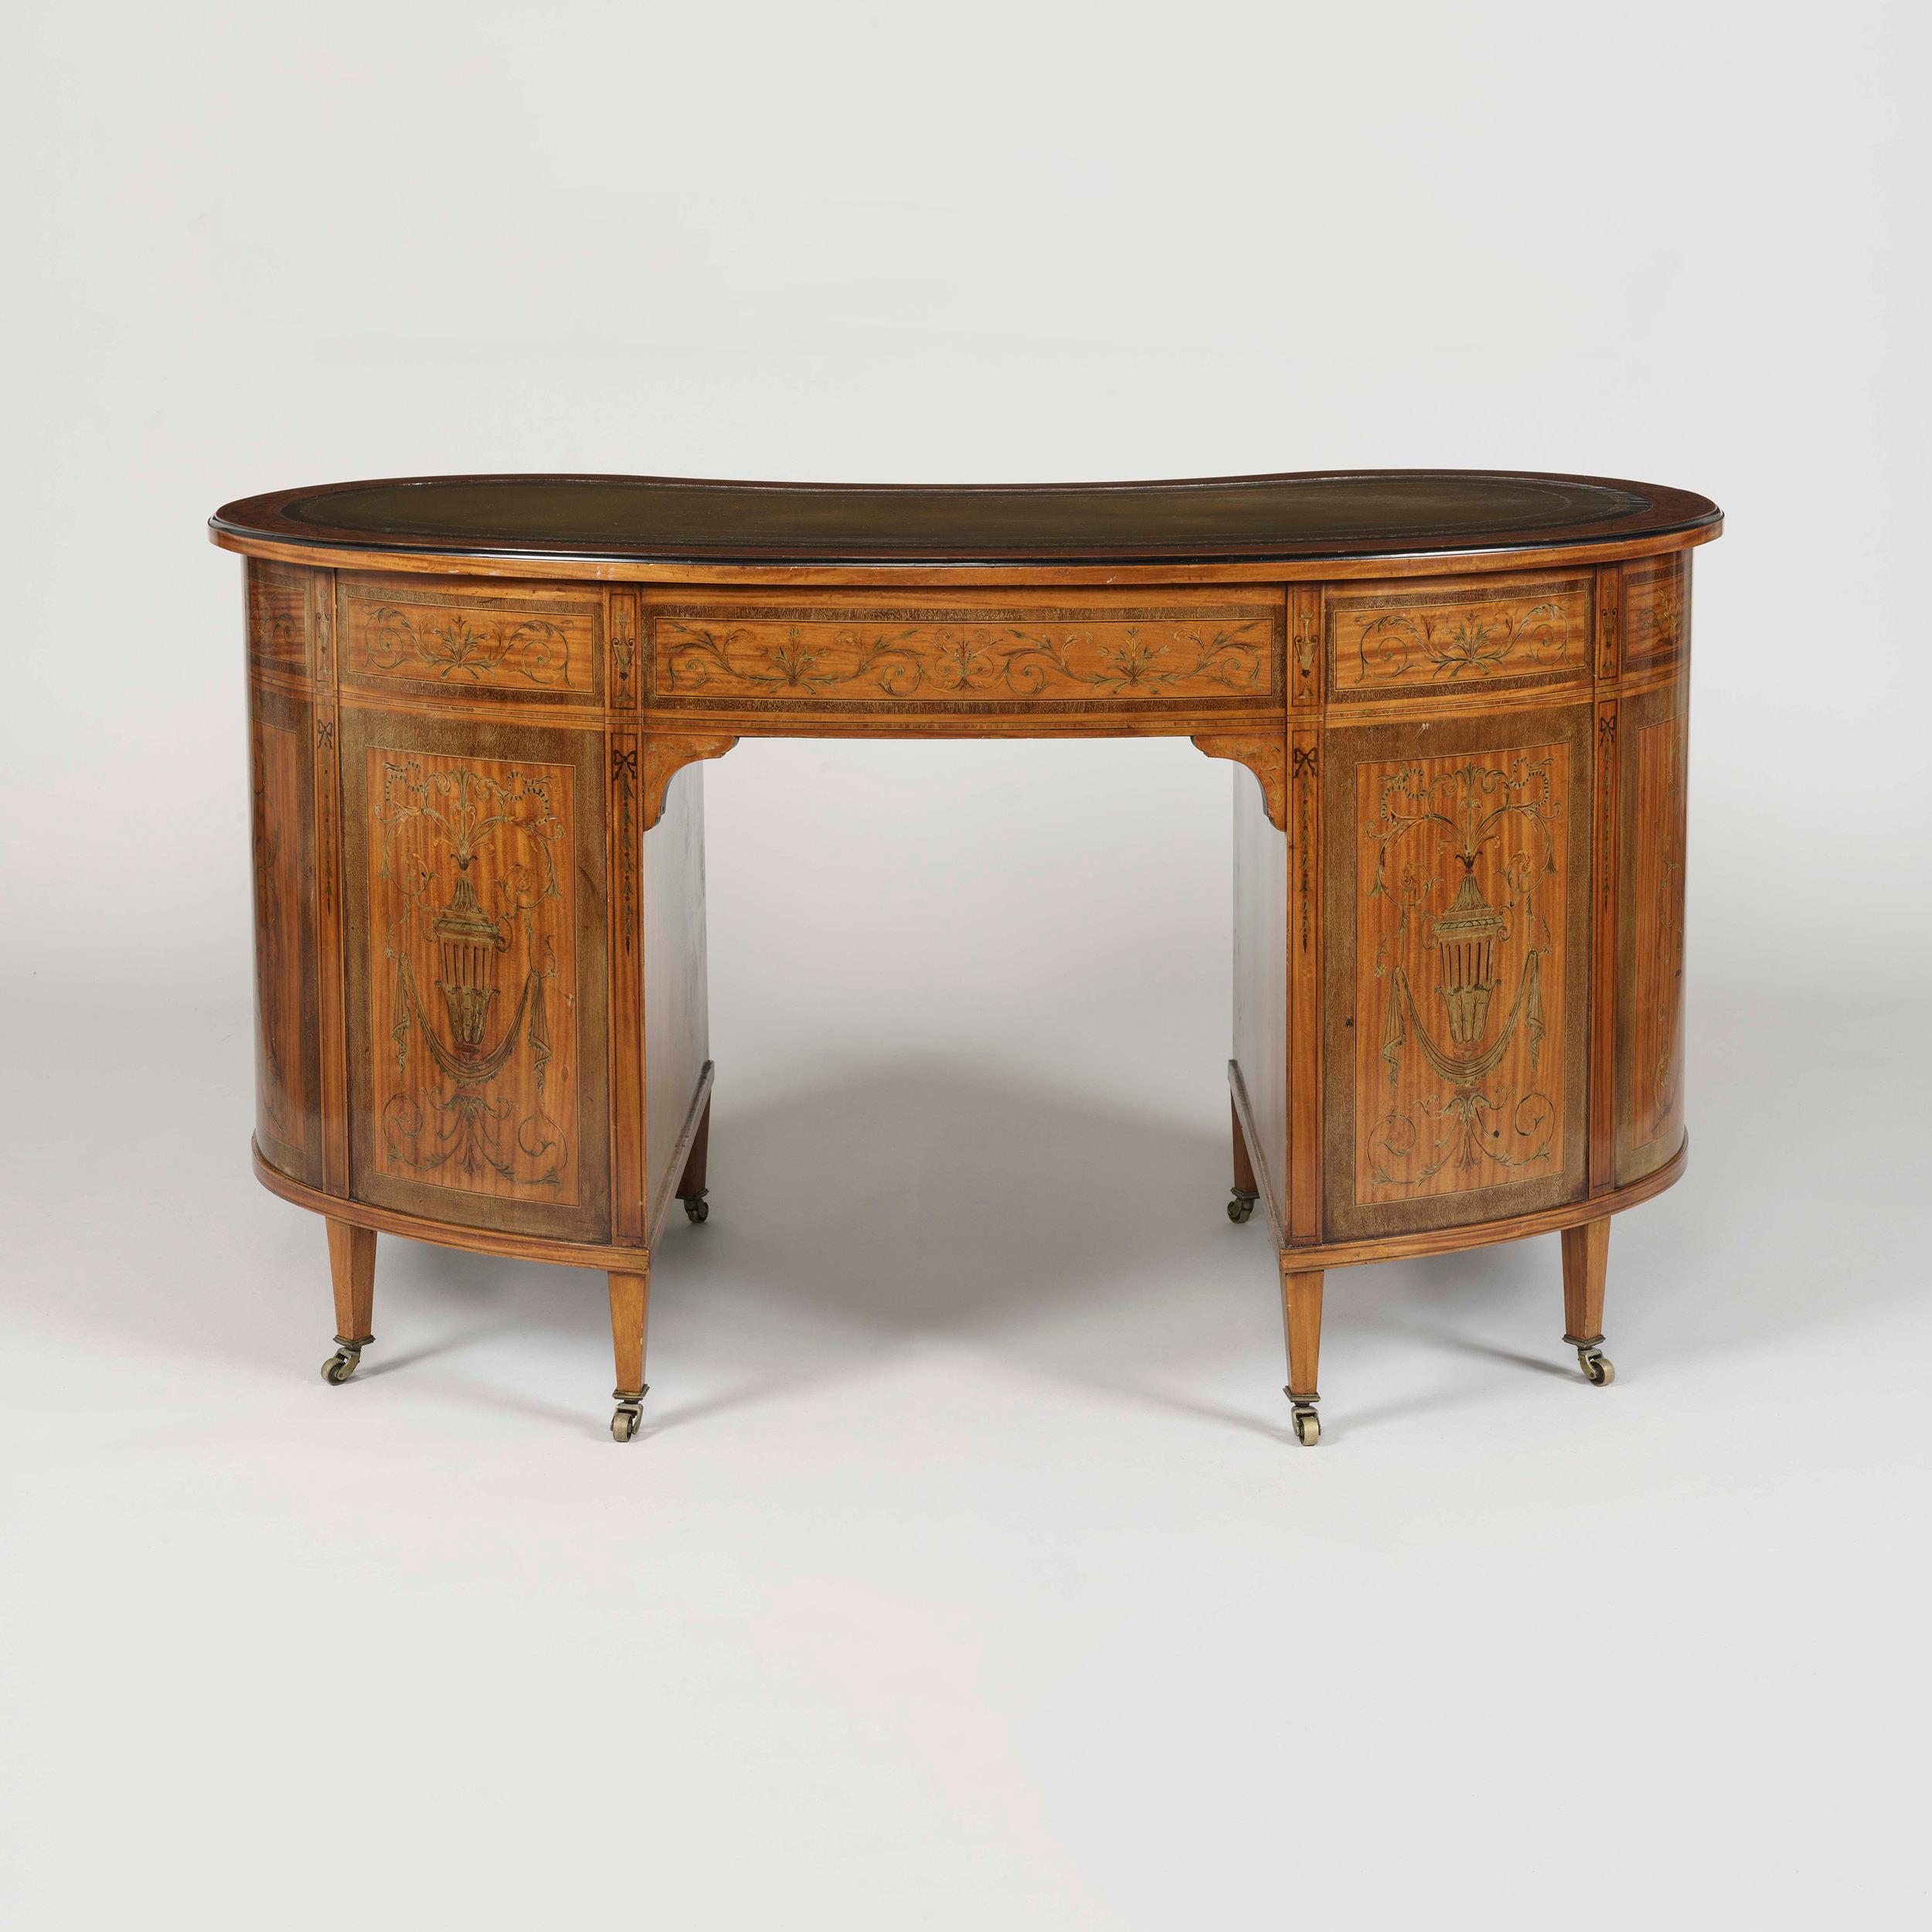 A satinwood and marquetry kidney-shaped writing desk
in the manner of Maple & Co

The moulded and tooled leather inset top above an arrangement of nine drawers, inlaid throughout with engraved foliate scrolls, and urns, within ebonized stringing